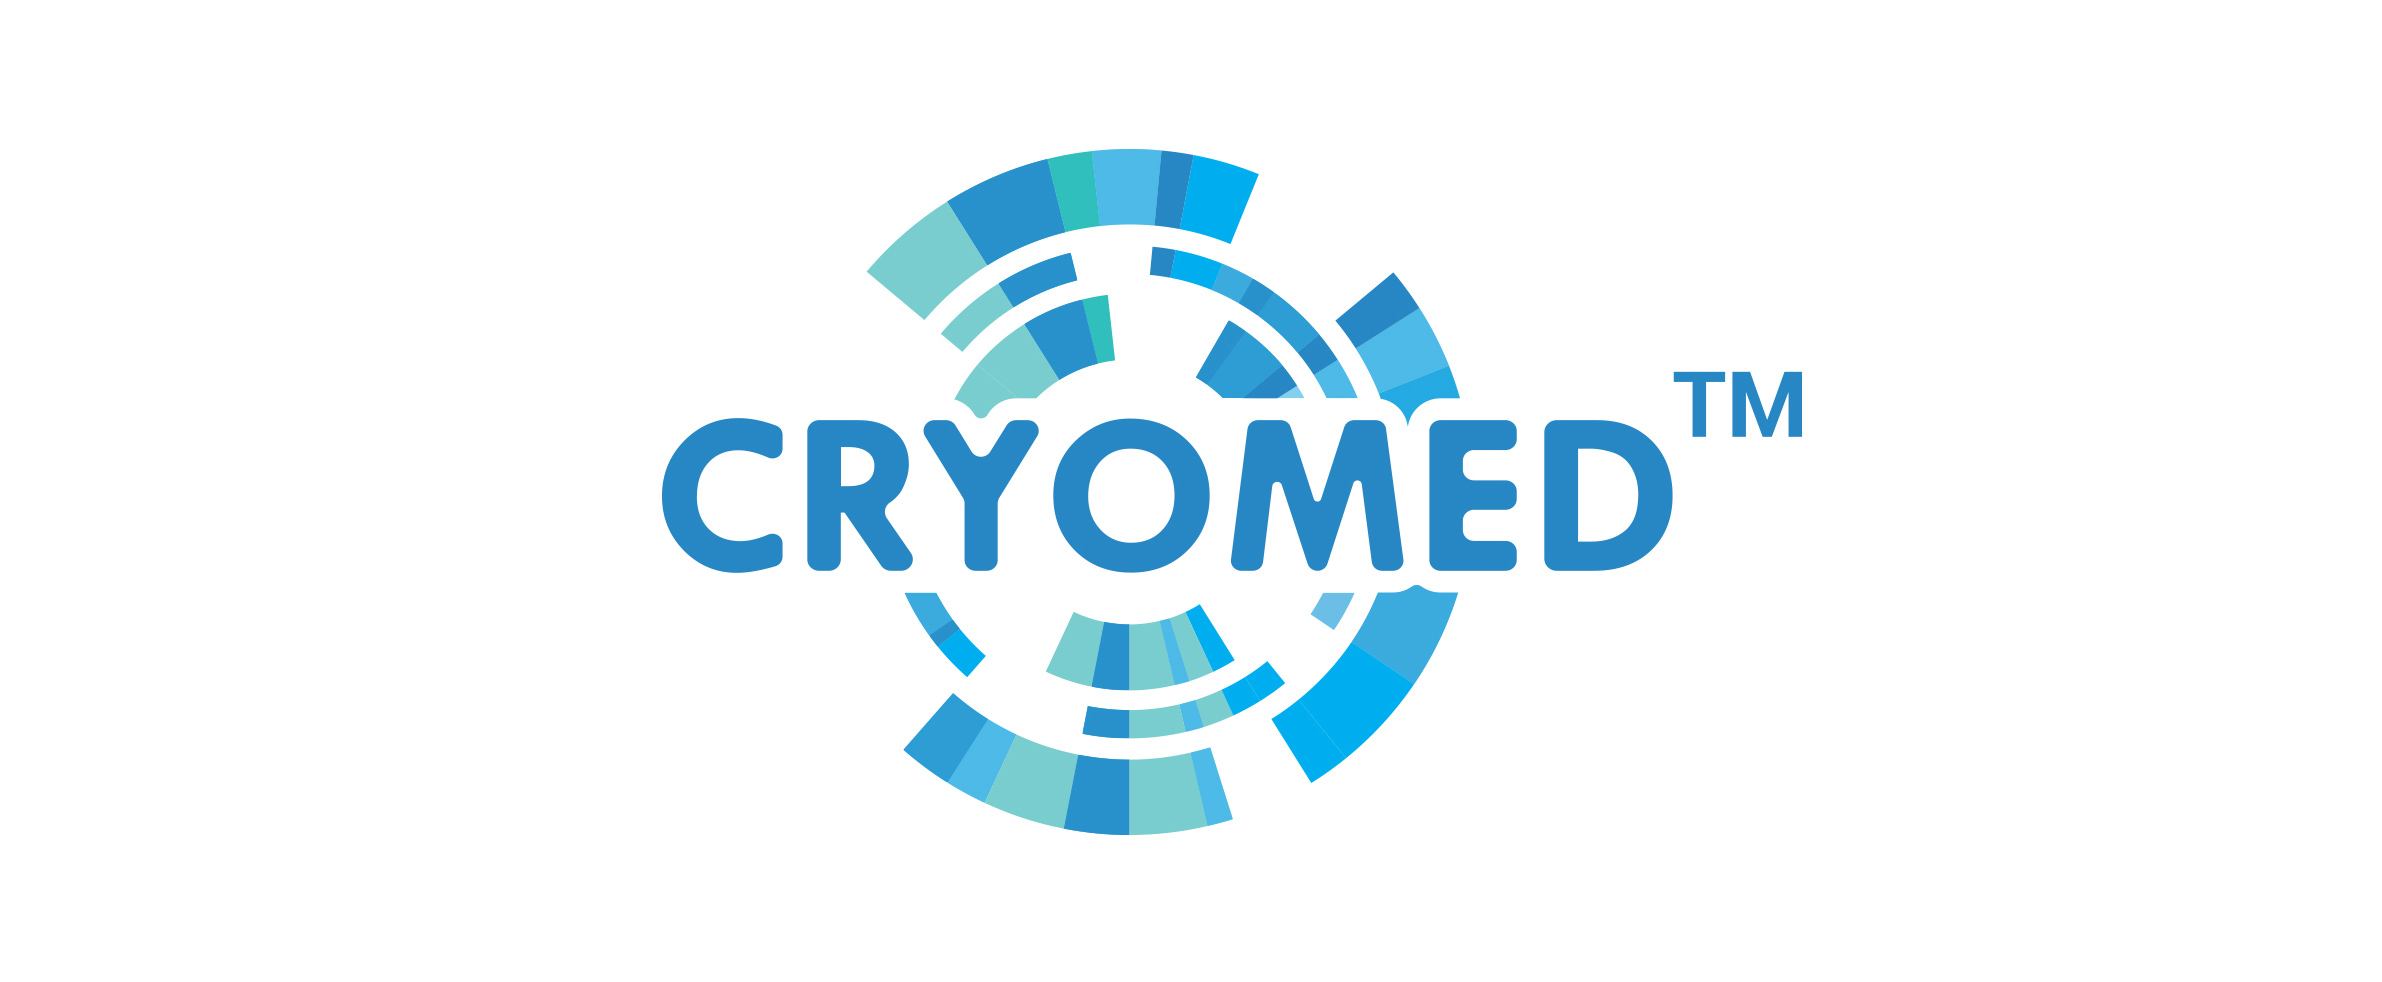 Cryomed launches Forum to become closer to customers